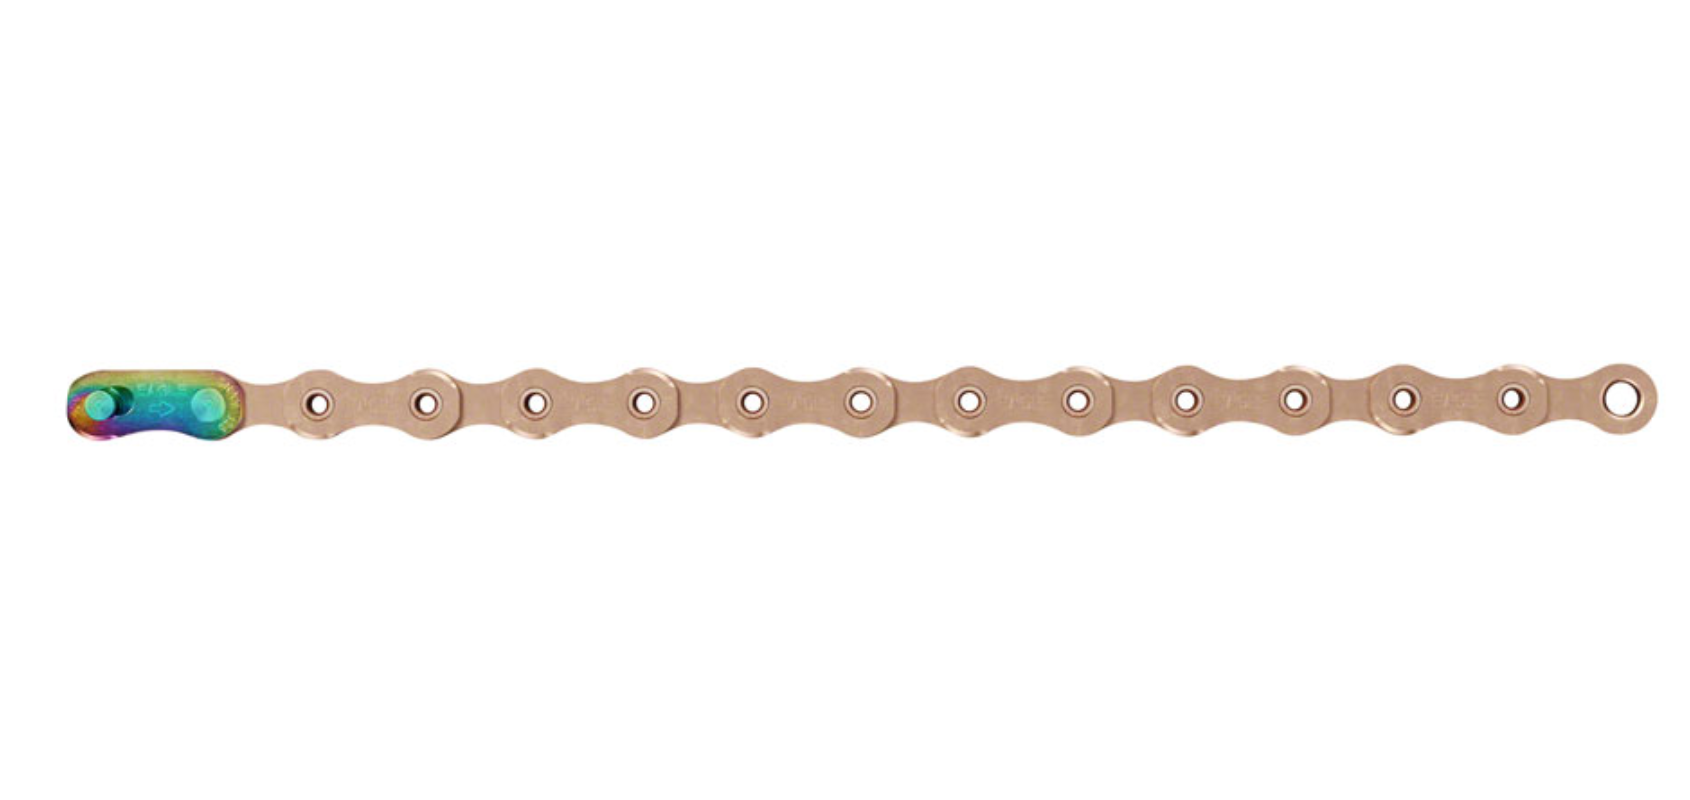 Image of XX1 Eagle Chain - 12-Speed 126 Links